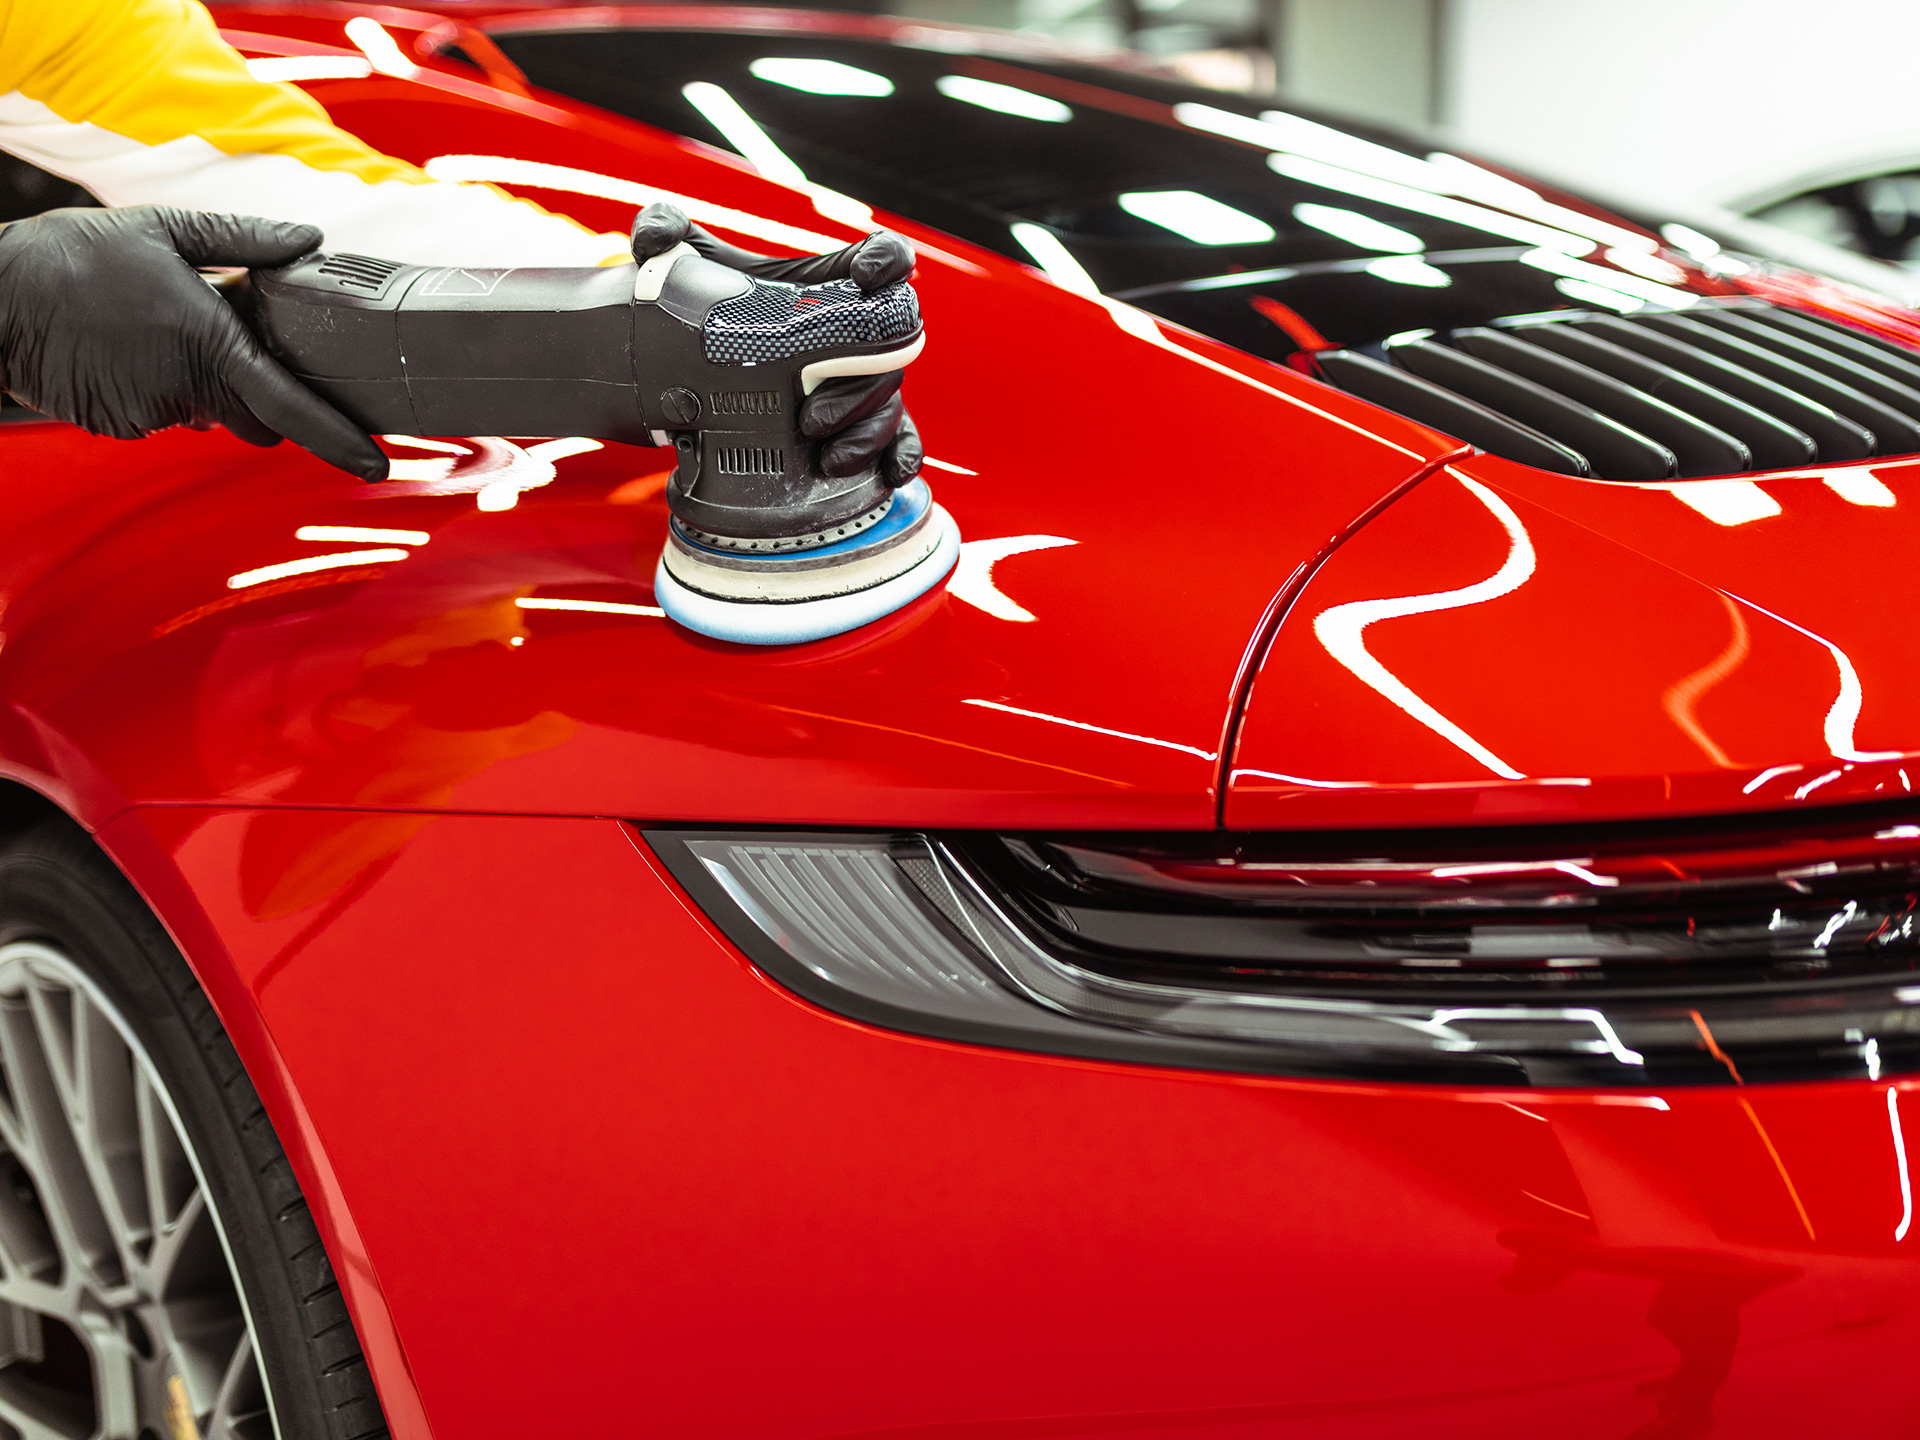 The best car waxes to keep your Porsche smooth and shiny